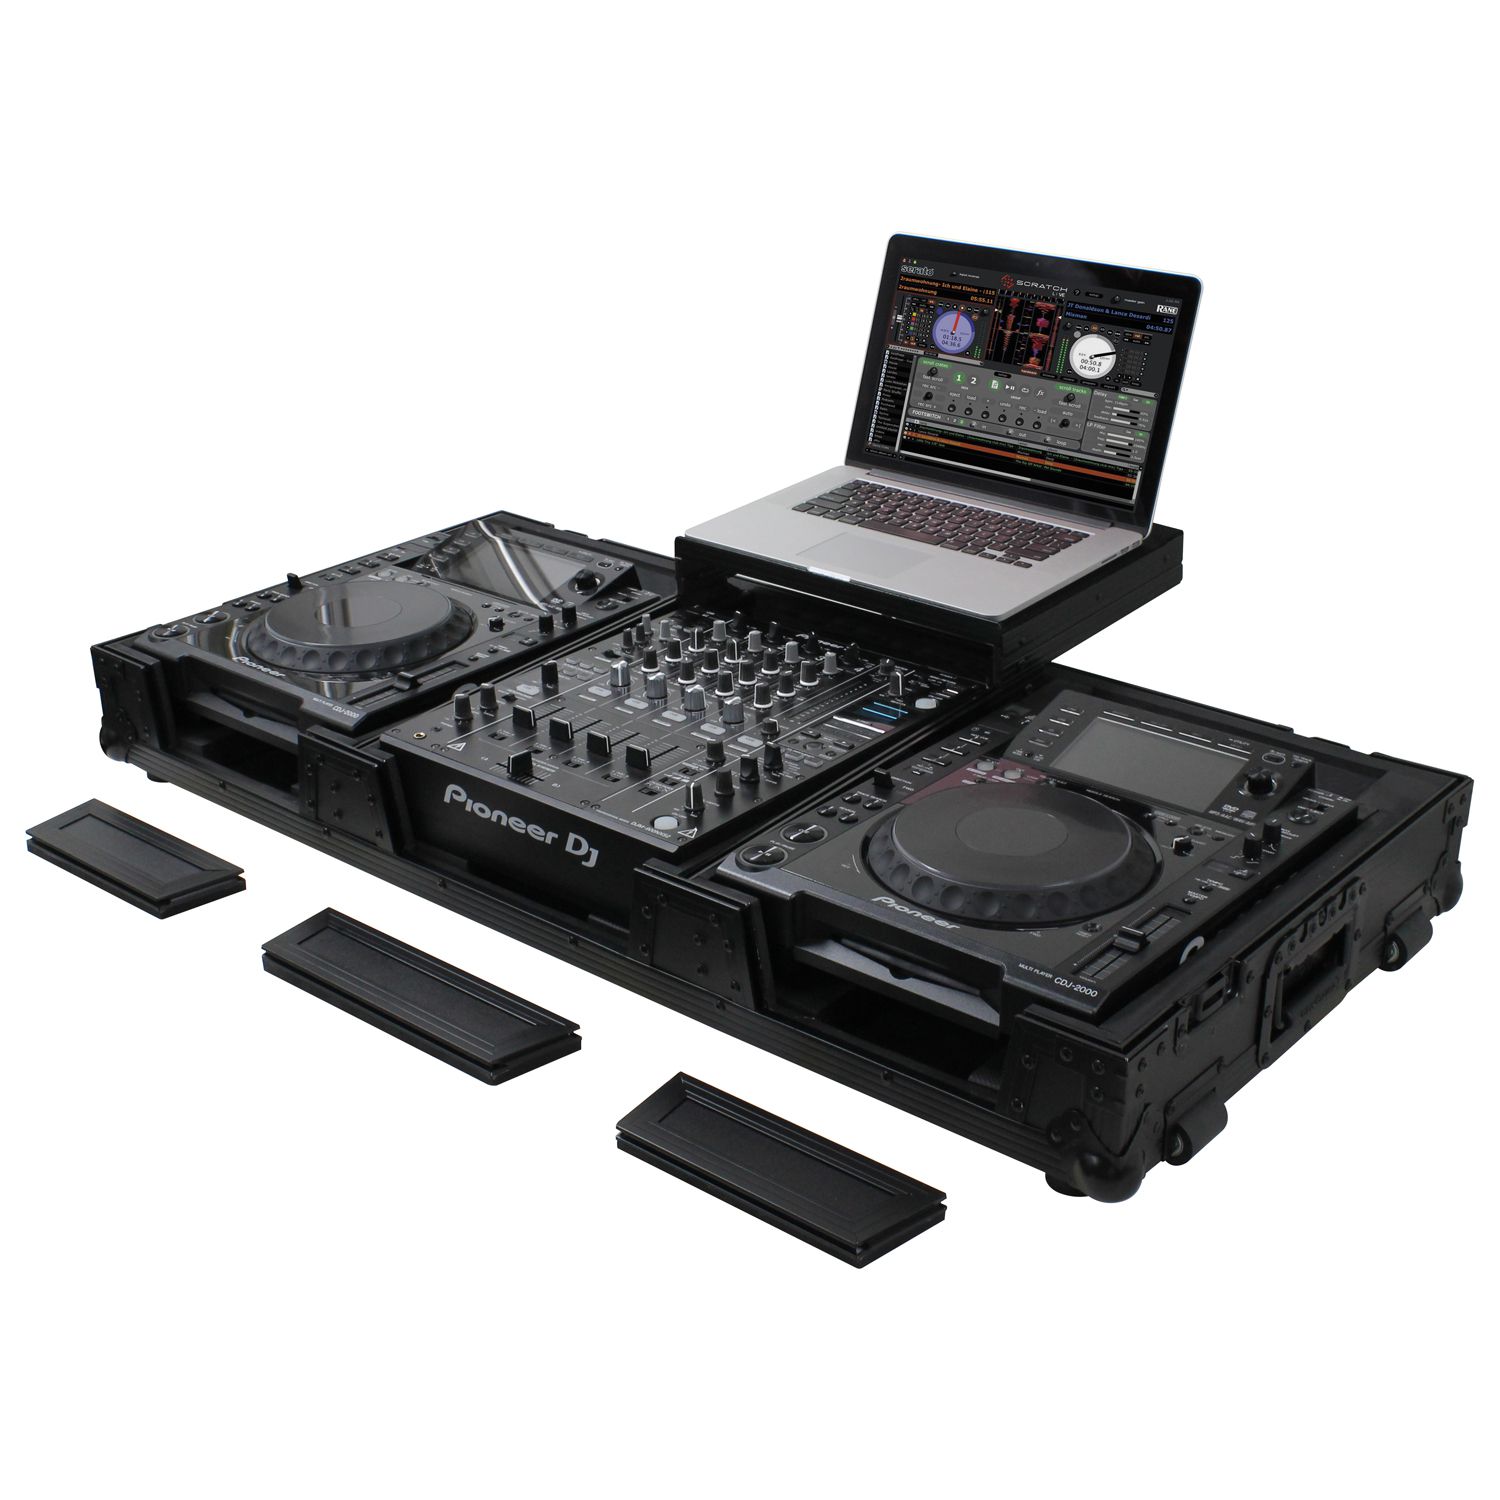 Odyssey FZGSDJ12W Flight Zone Glide Style Ata Dj Coffin With Wheels For A 12 Mixer & Two Turntables In Standard Position 